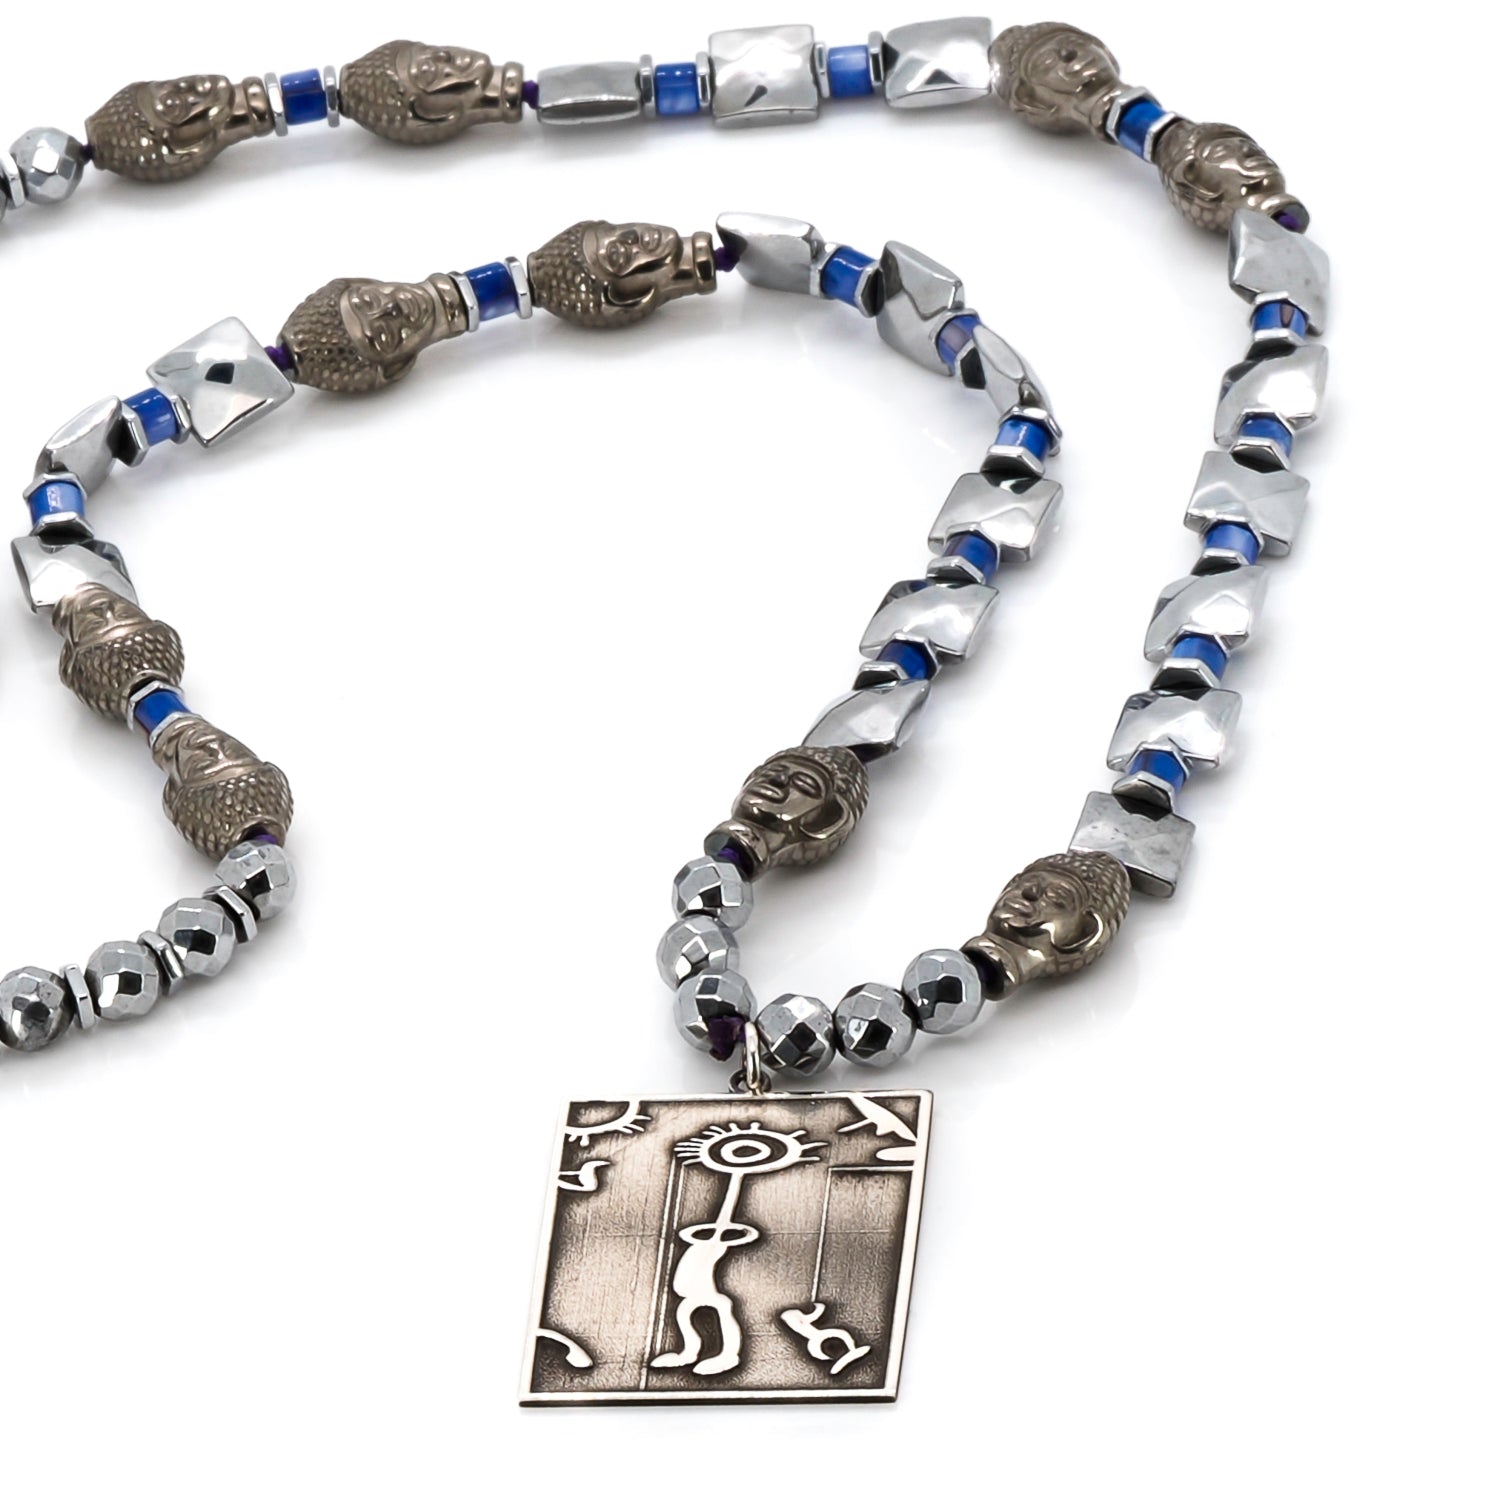 Handmade Necklace with Sterling Silver Shaman Pendant